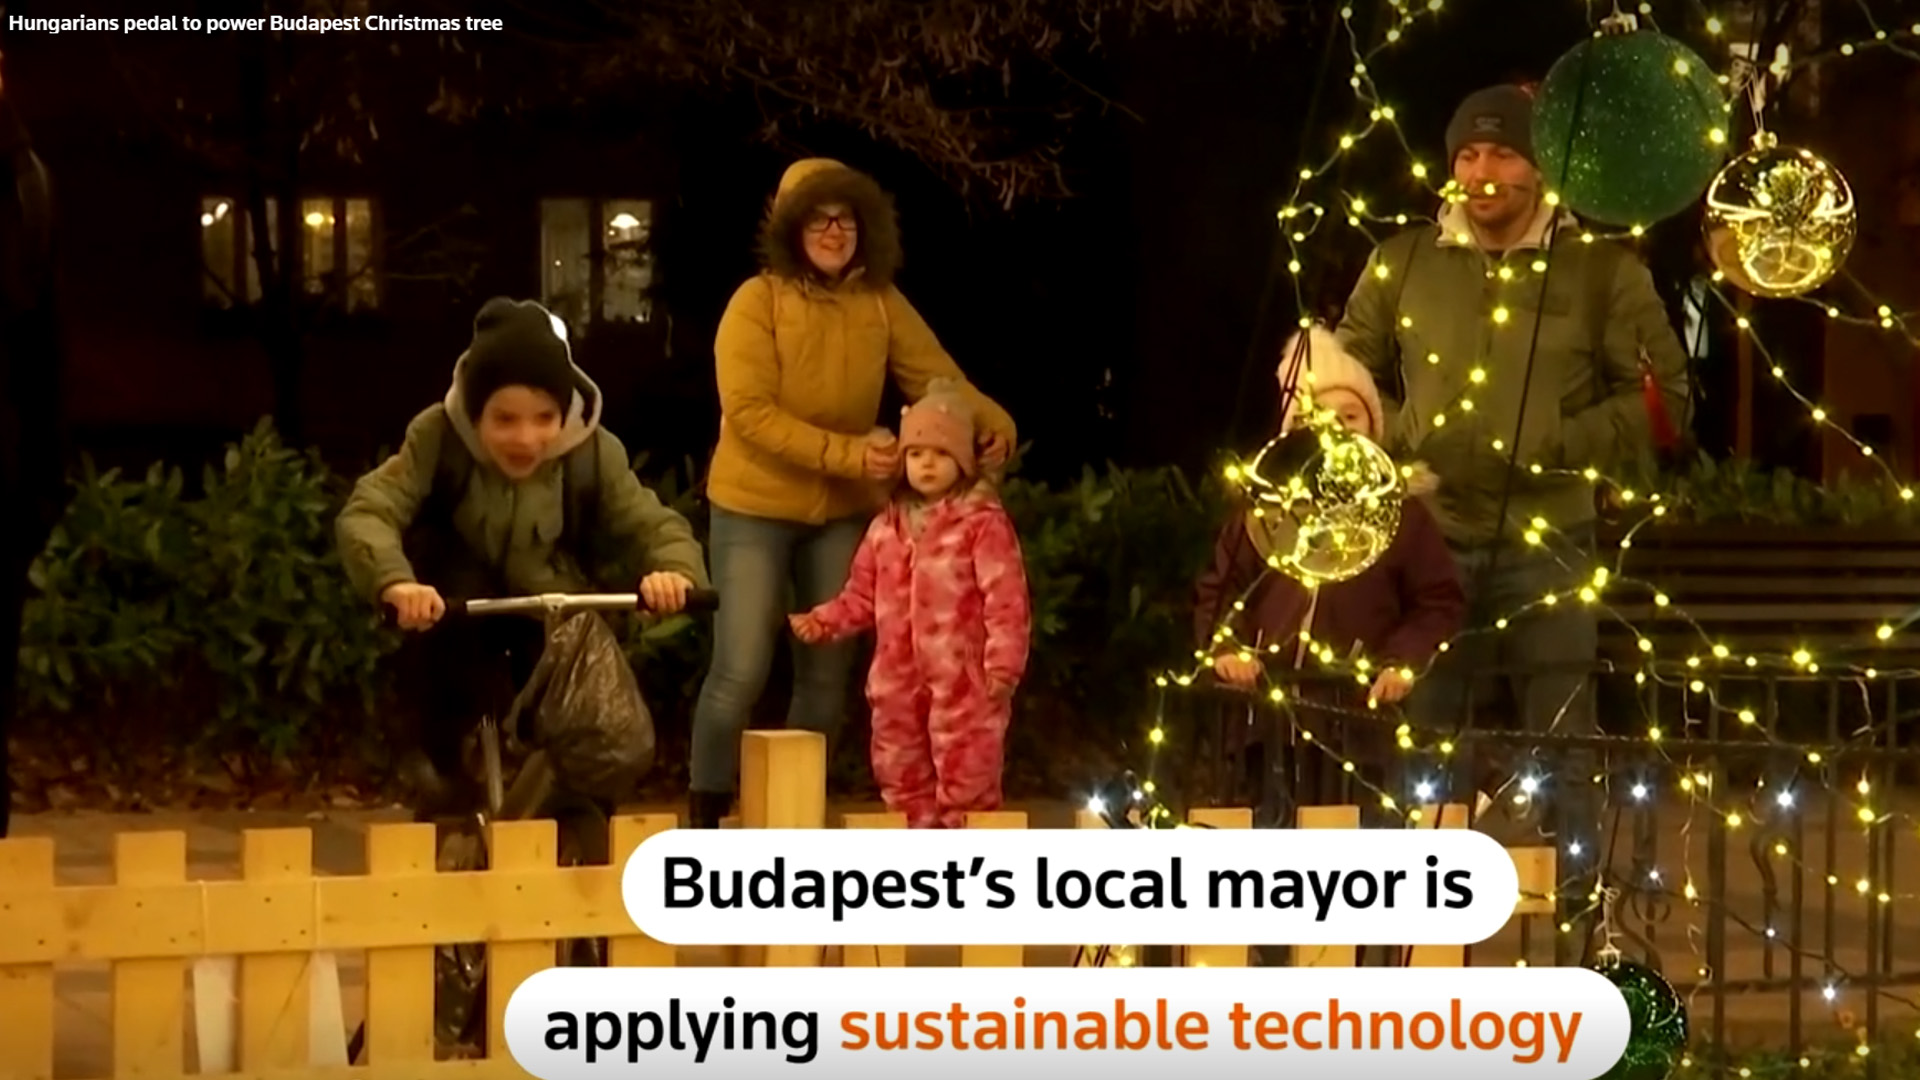 Watch: Locals Pedal to Power Christmas Tree Lights in Budapest 2nd District